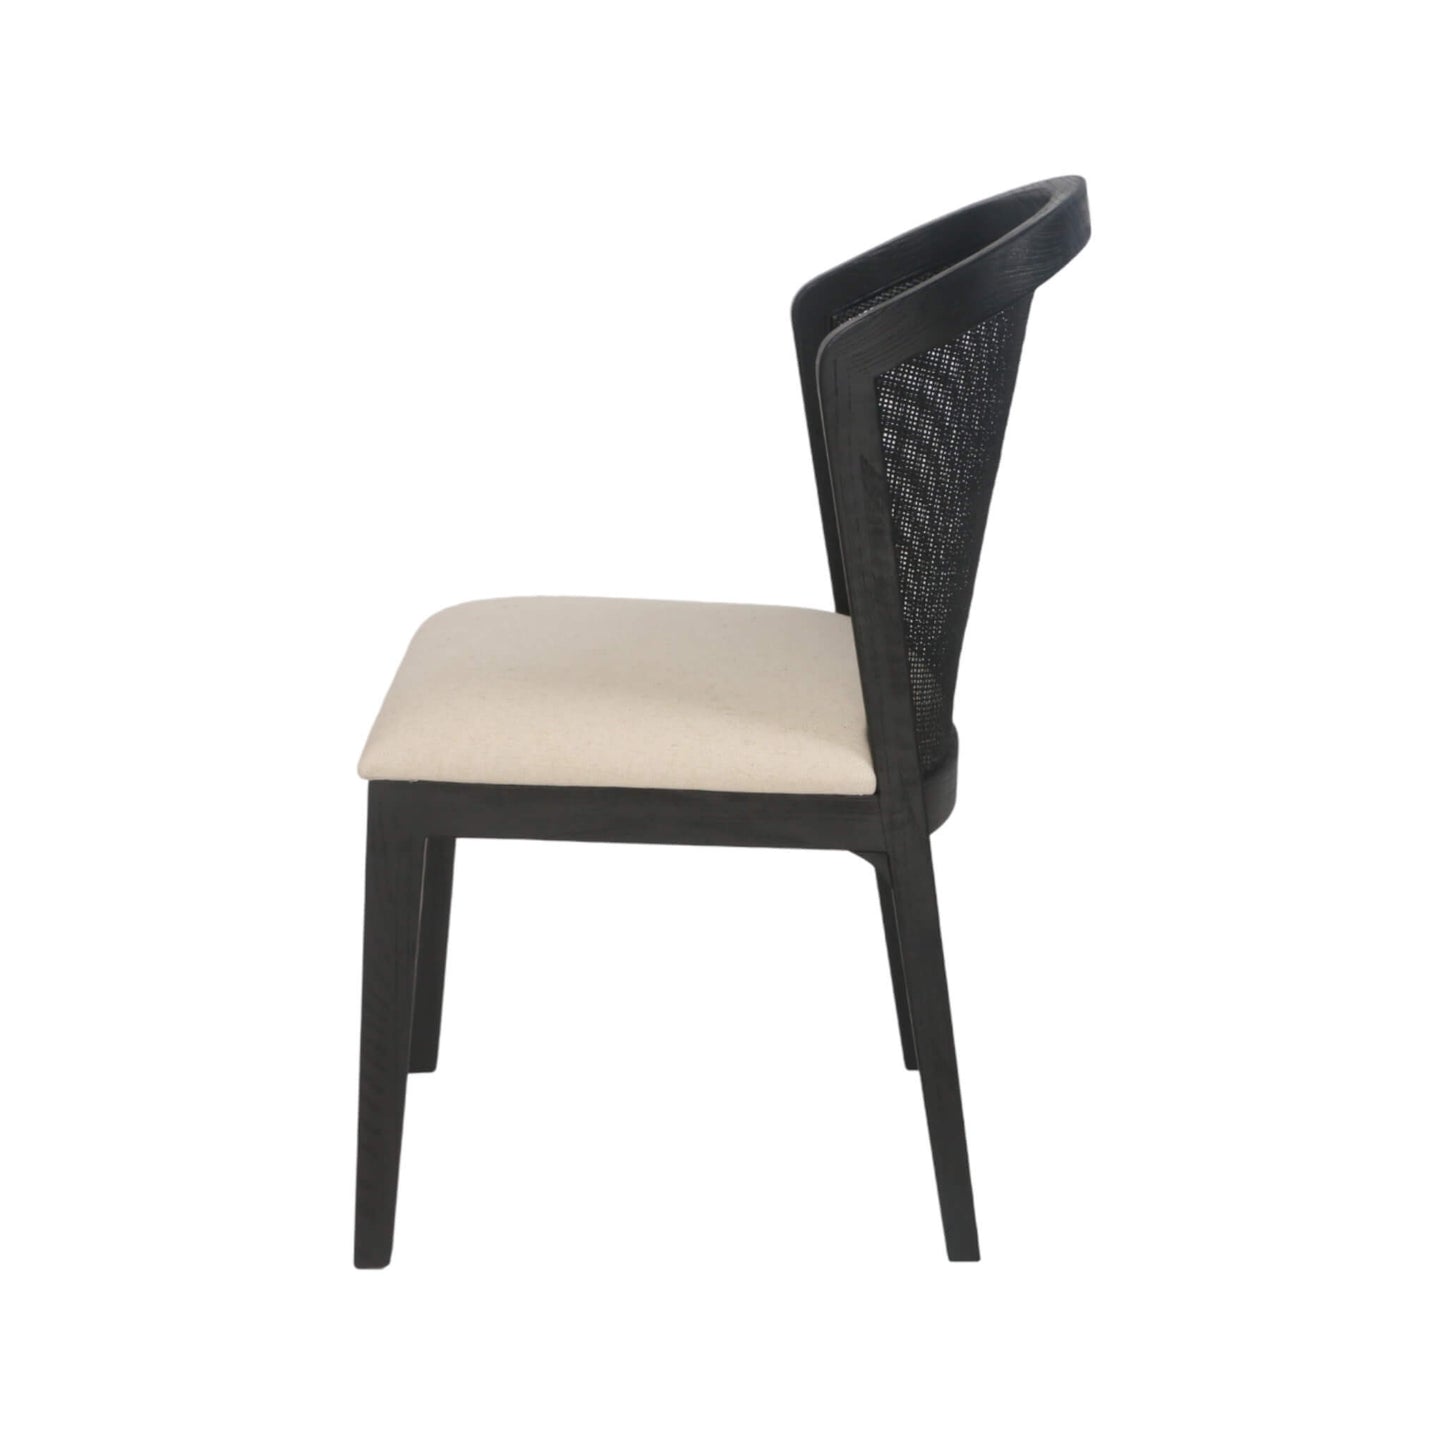 Highfield | Light Beige Cane Commercial Wooden Dining Chair | Black